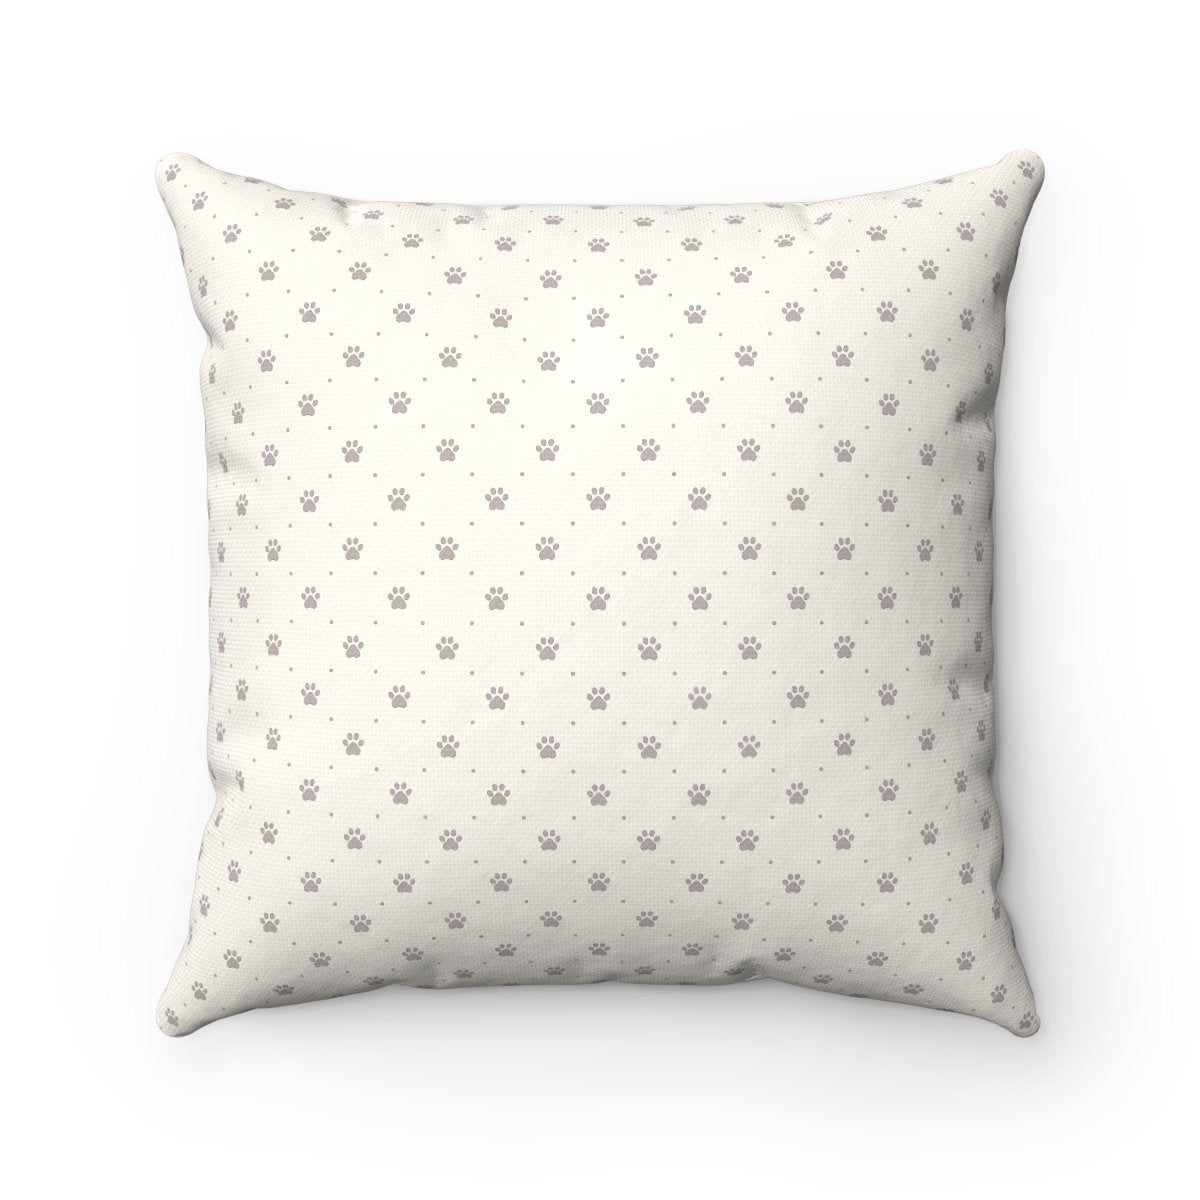 The back of this decorative cat pillow features a beige paw print pattern that is easy to coordinate with the rest of your home decor and furniture.